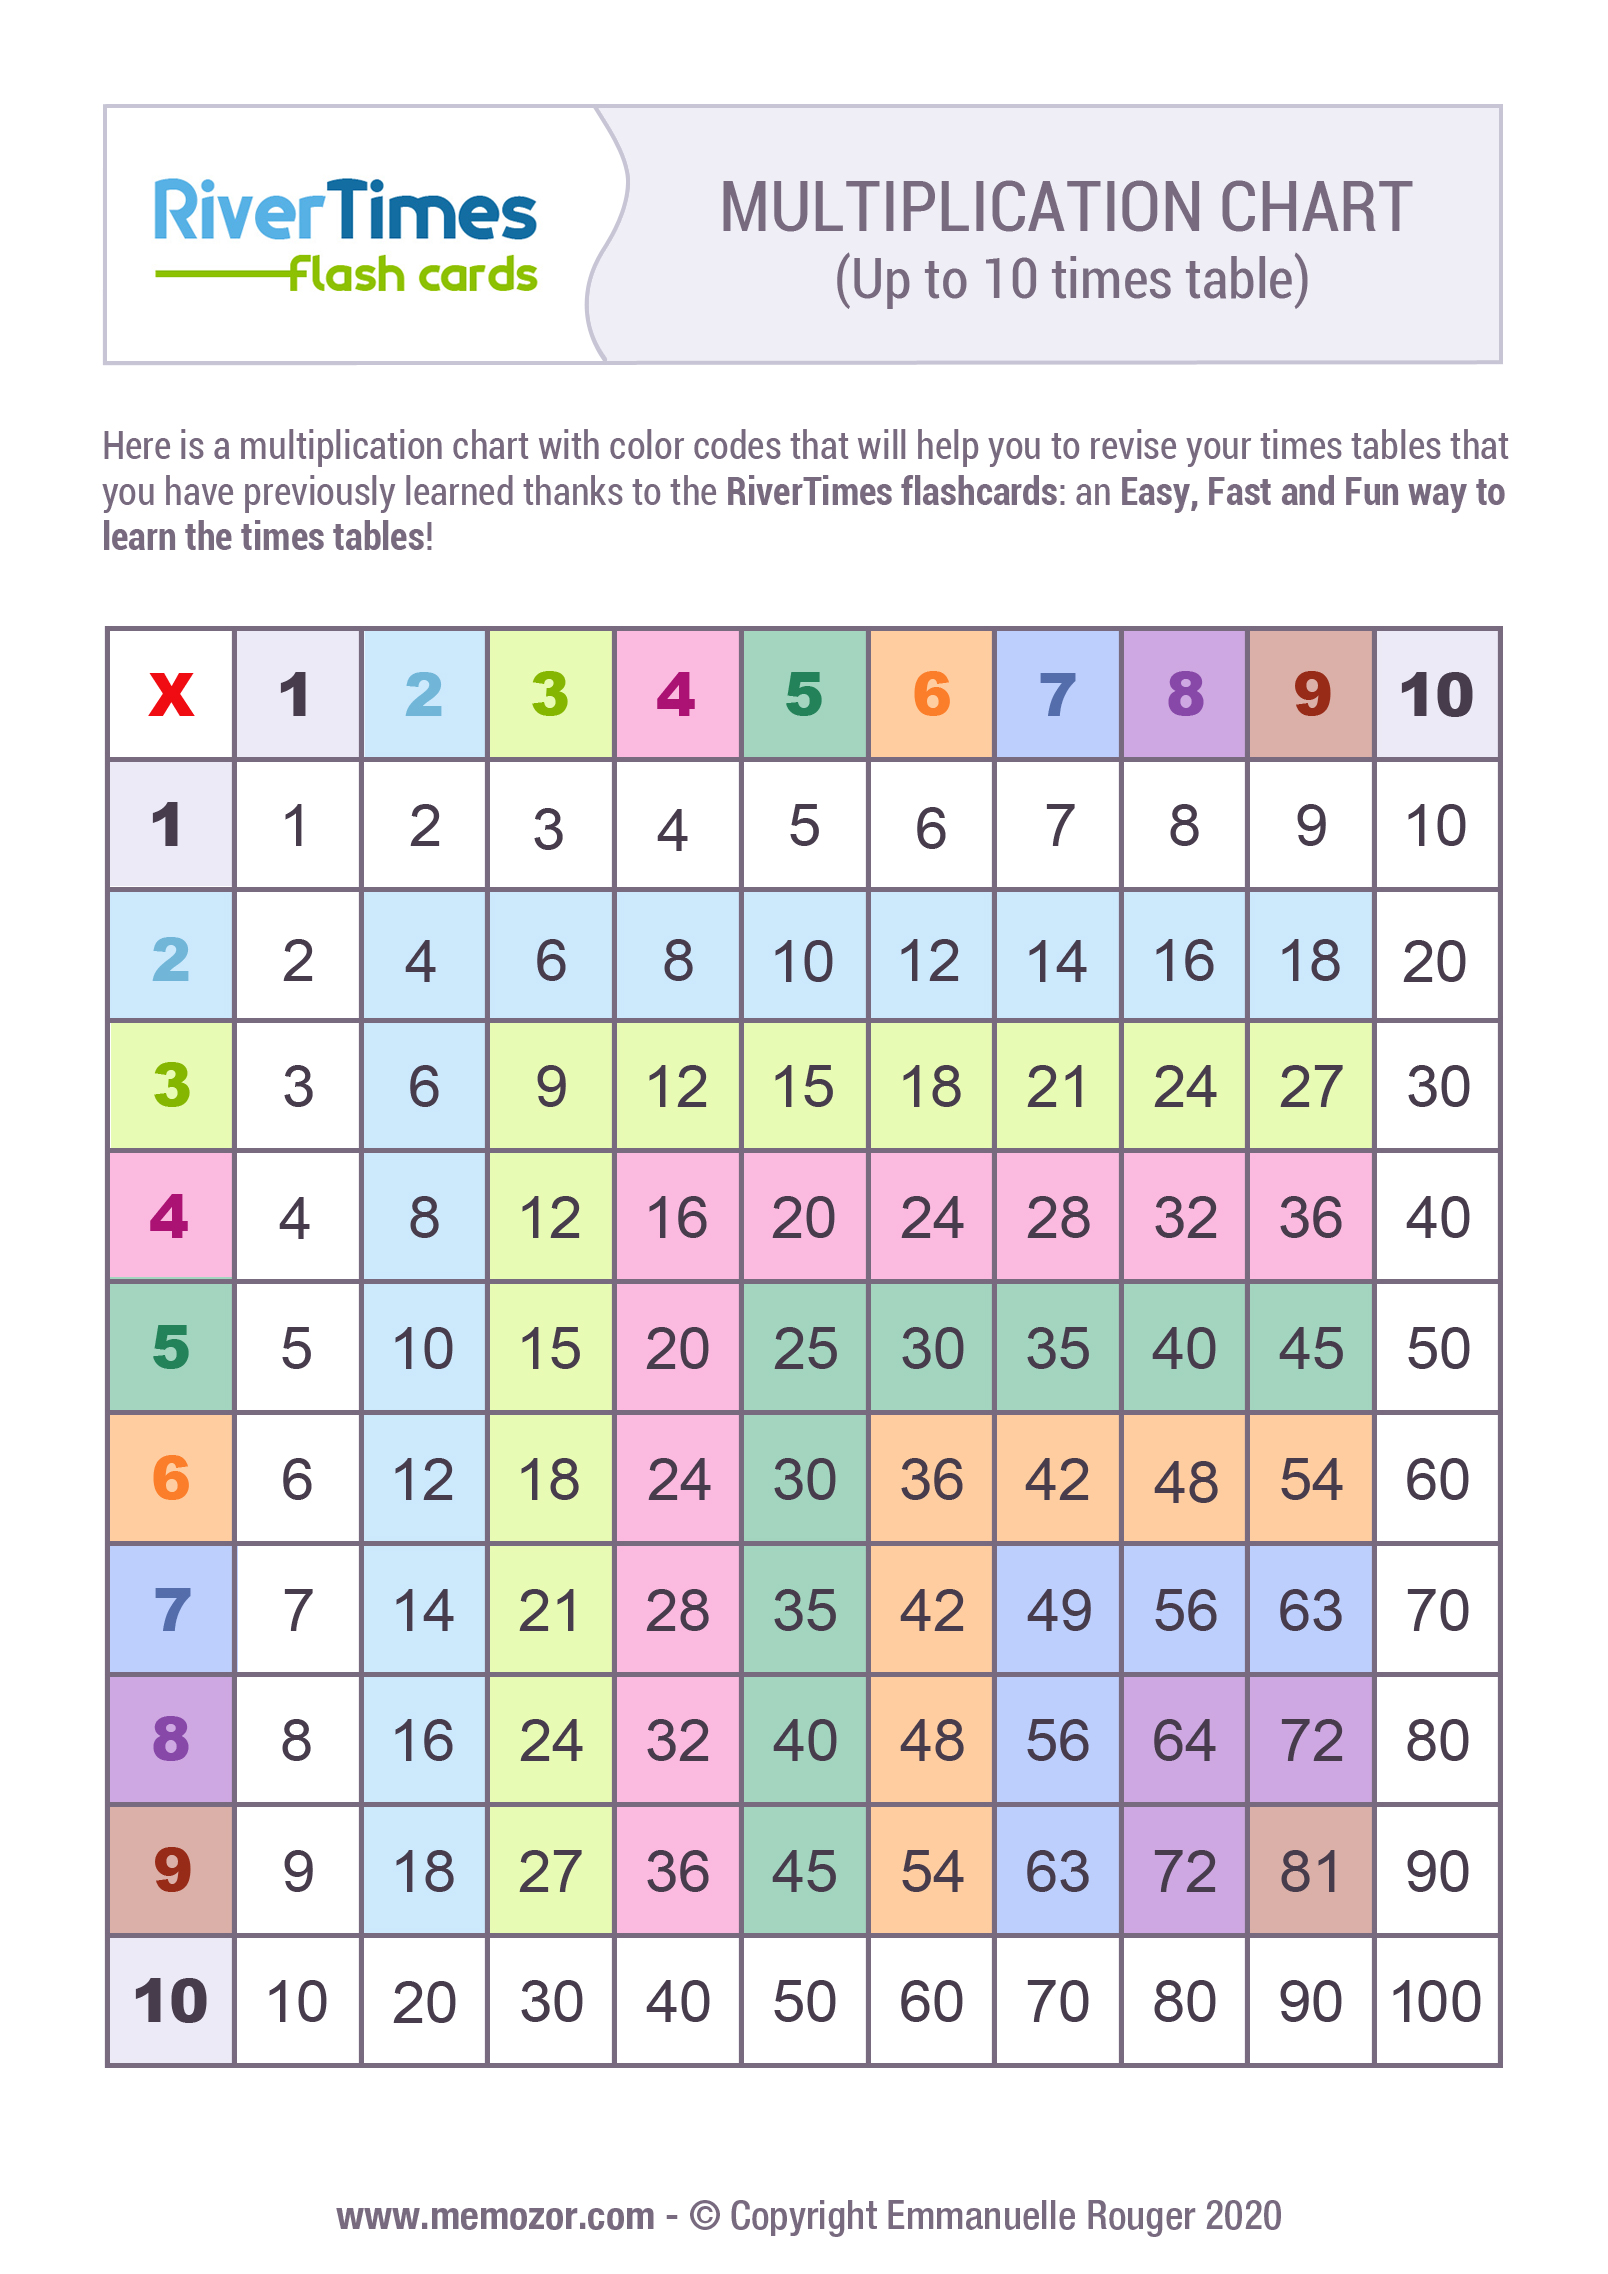 Complete And Colourful Multiplication Table To Print Memozor